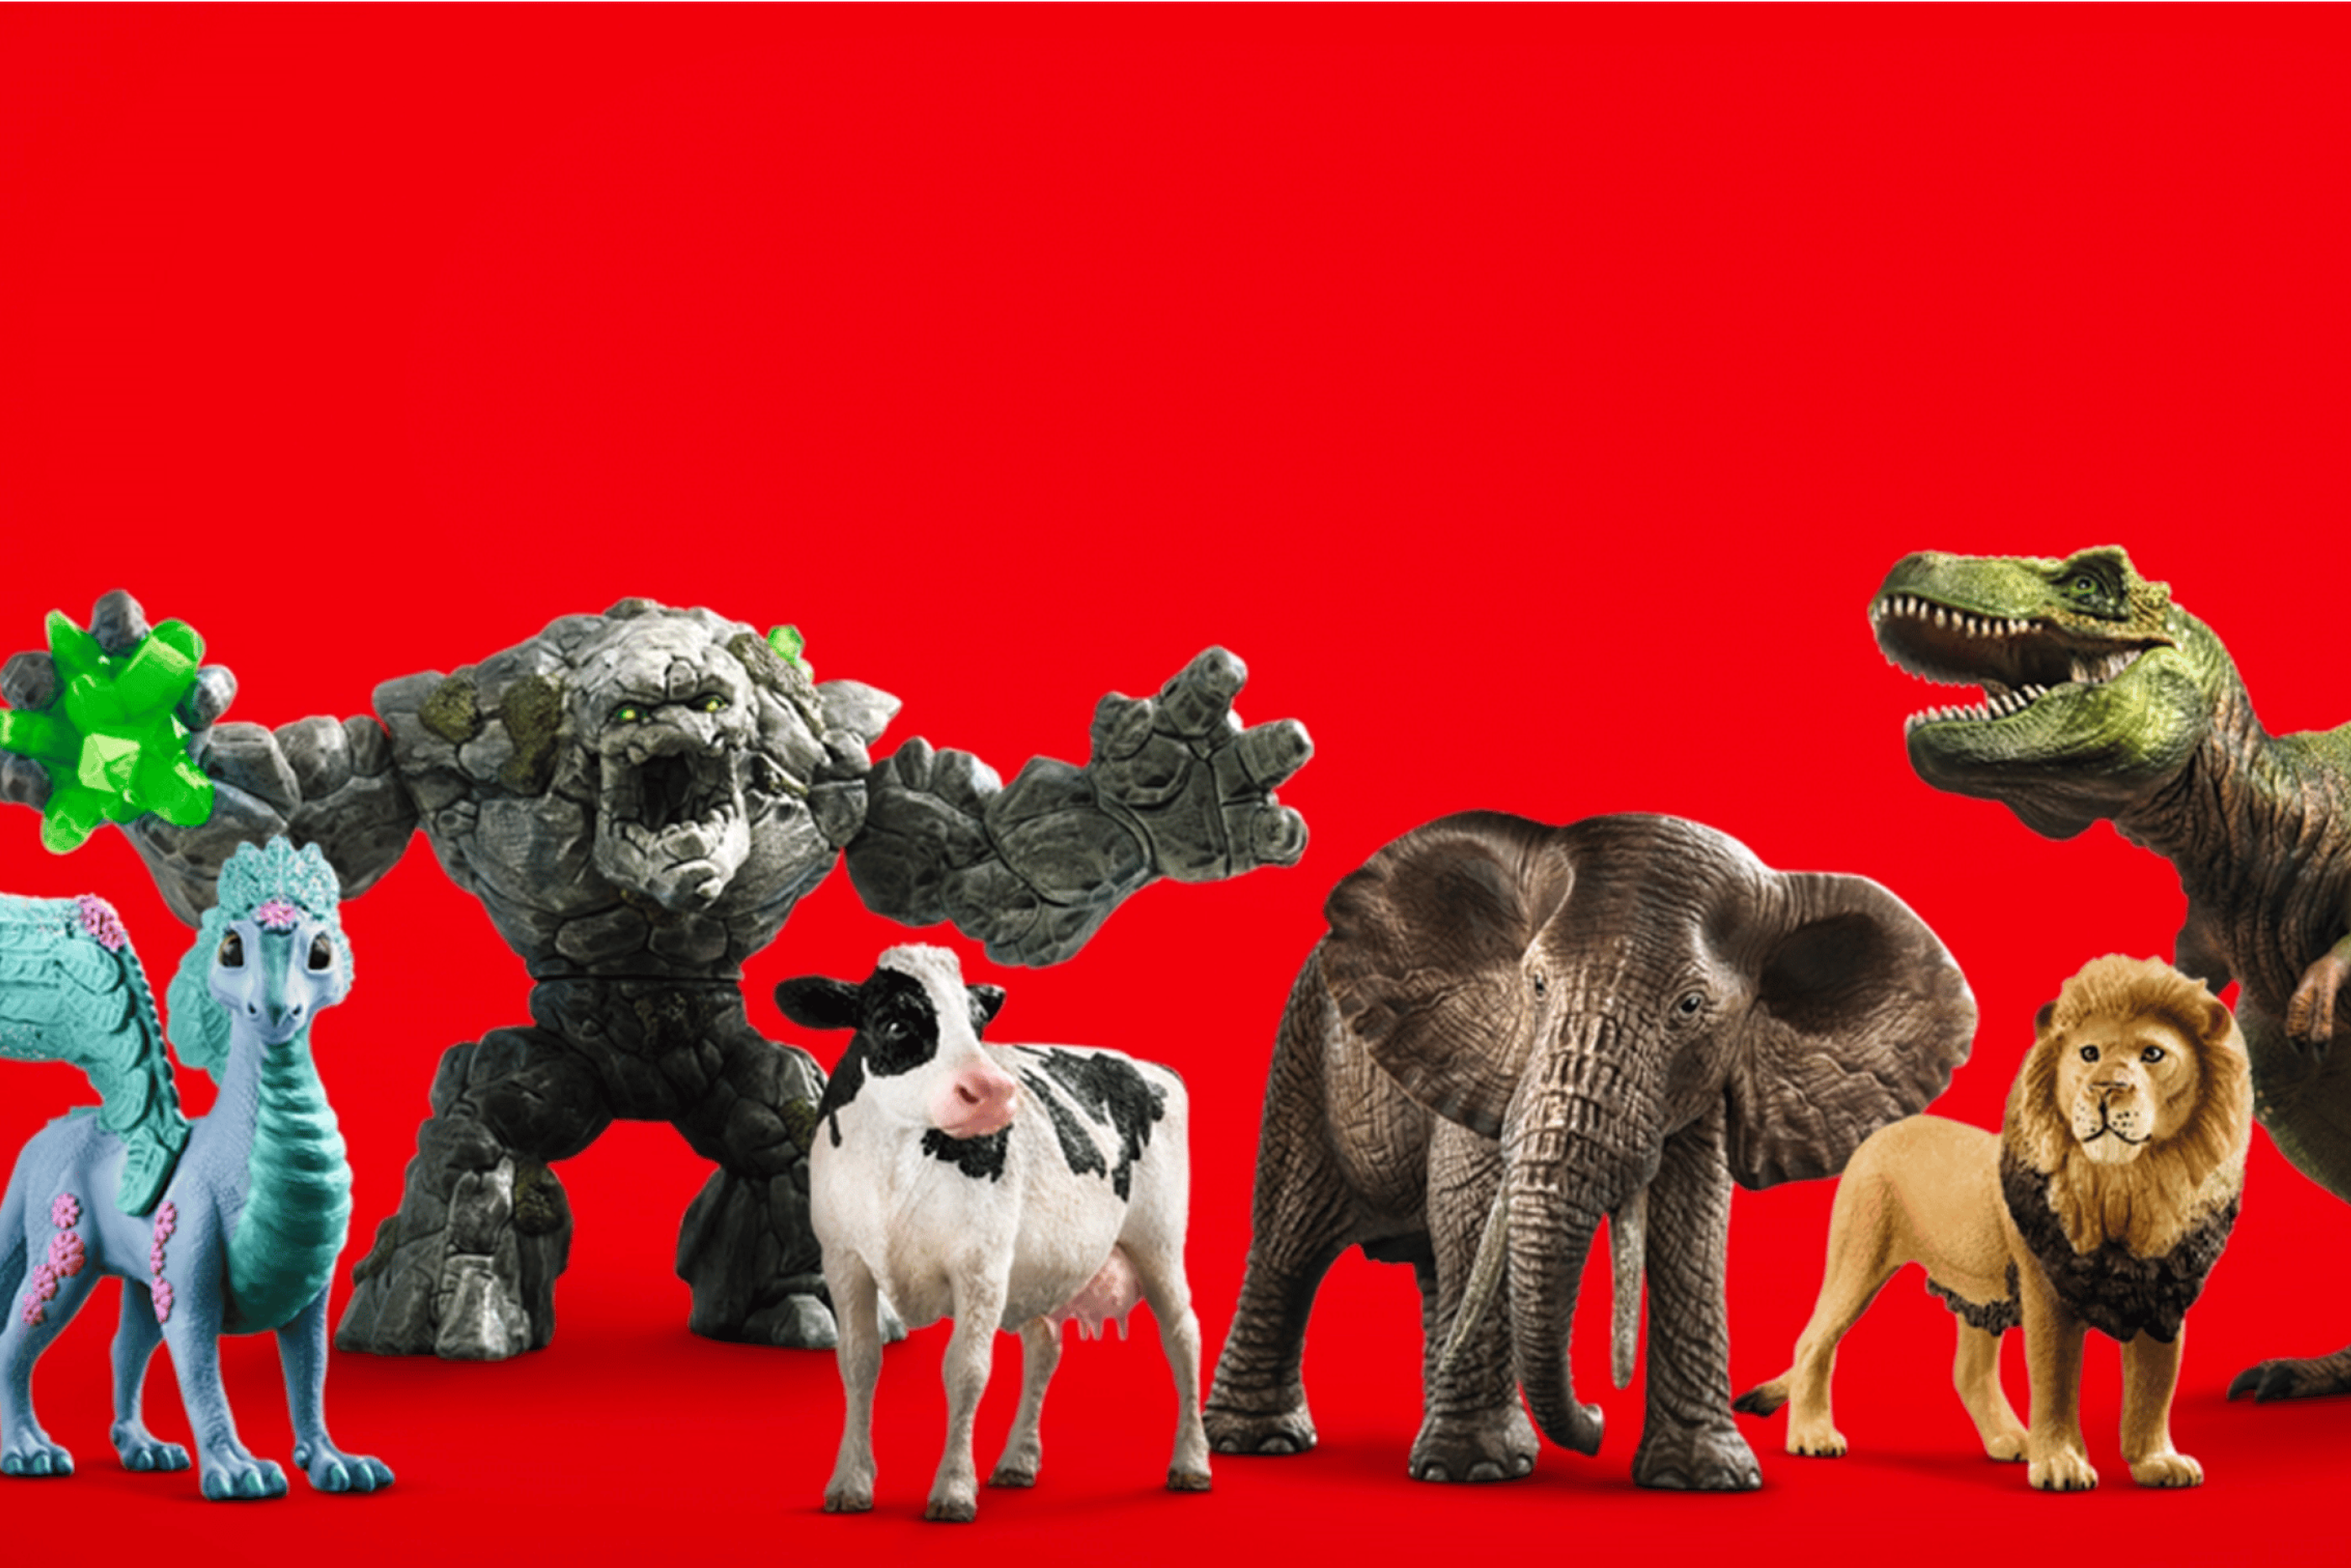 Various Schleich figurines on a red background